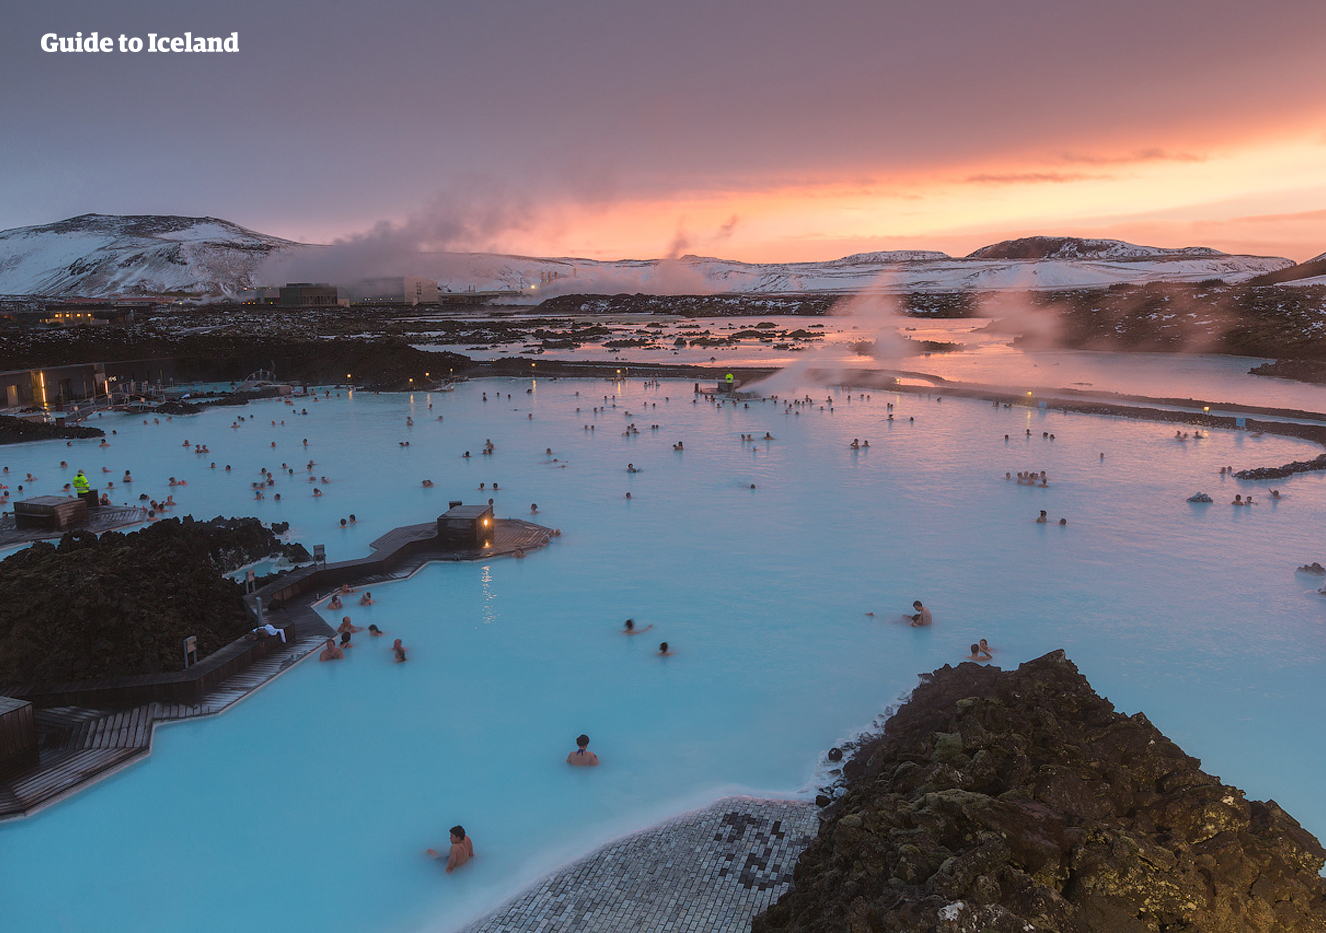 Azure waters and emerald moss reveal the contrasts of the Blue Lagoon on the Reykjanes Peninsula.